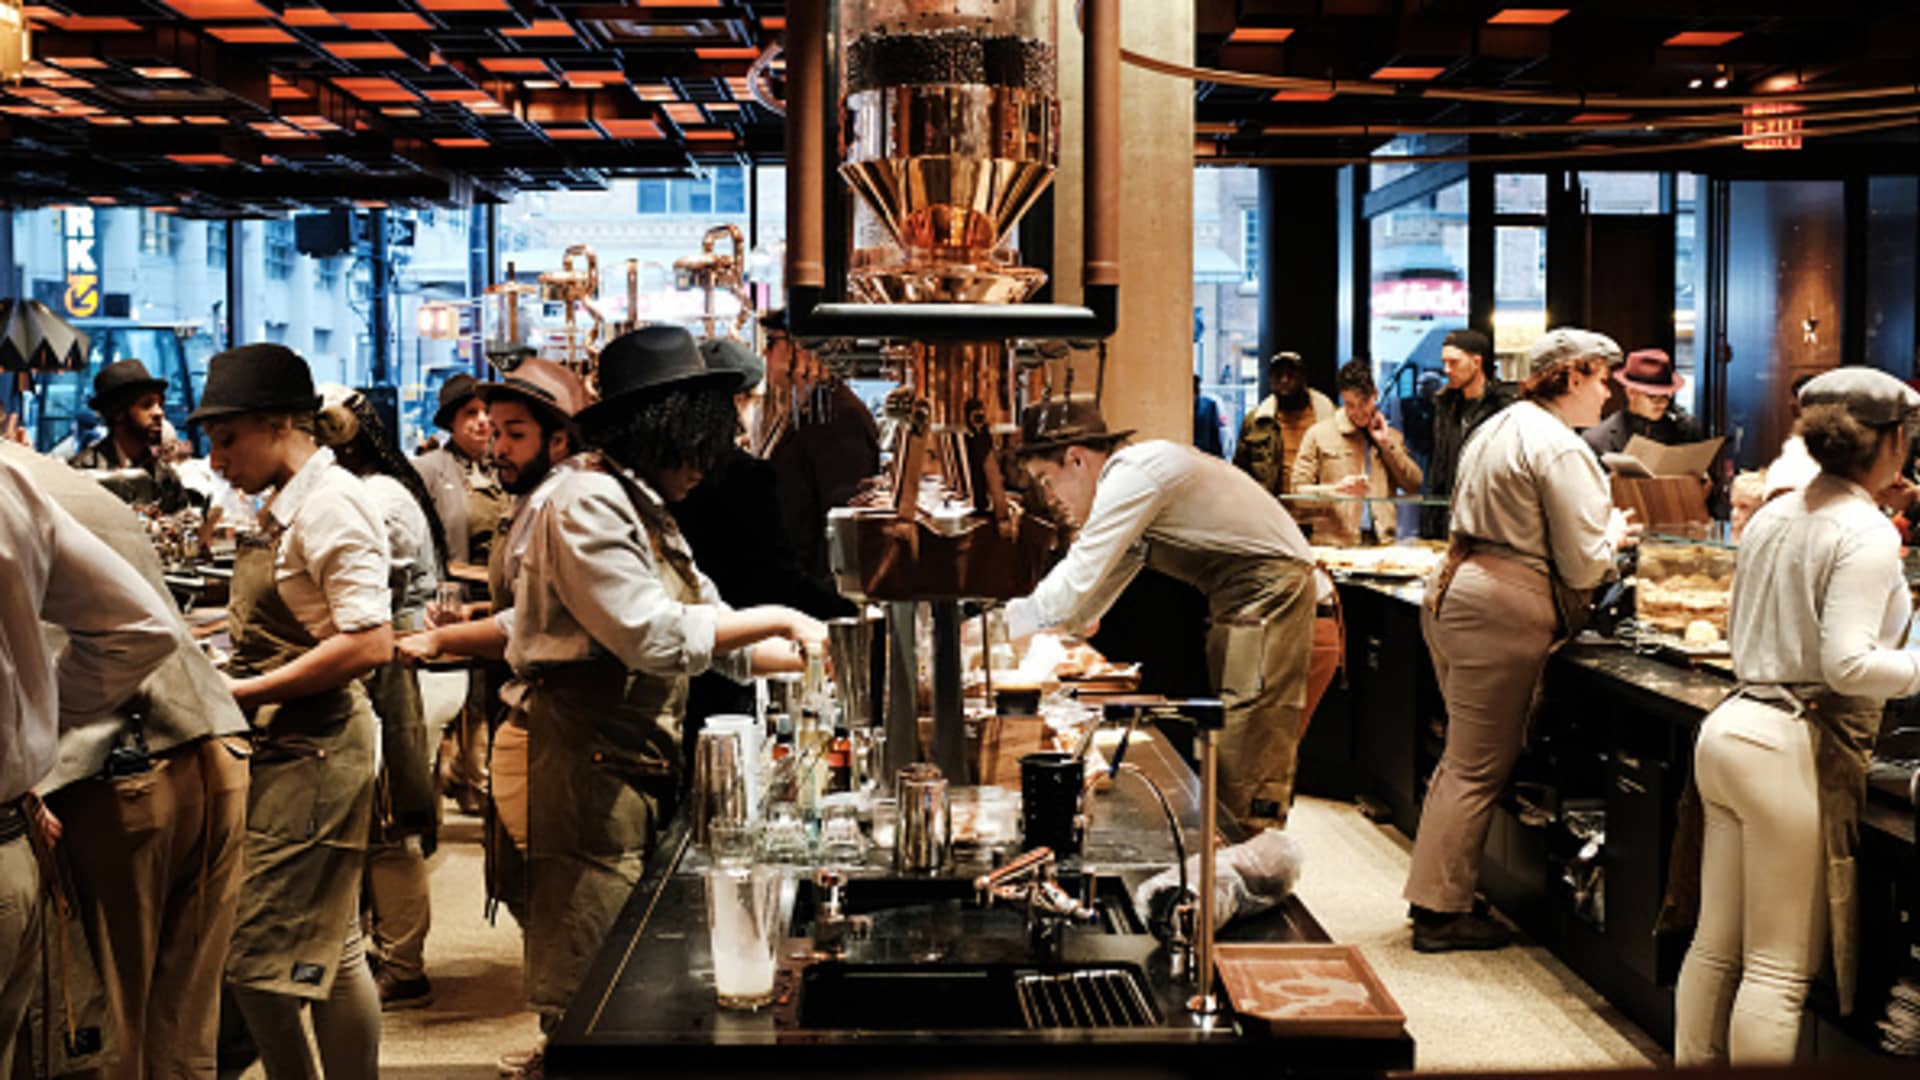 Starbucks’ New York City Reserve Roastery becomes the 9th cafe to unionize